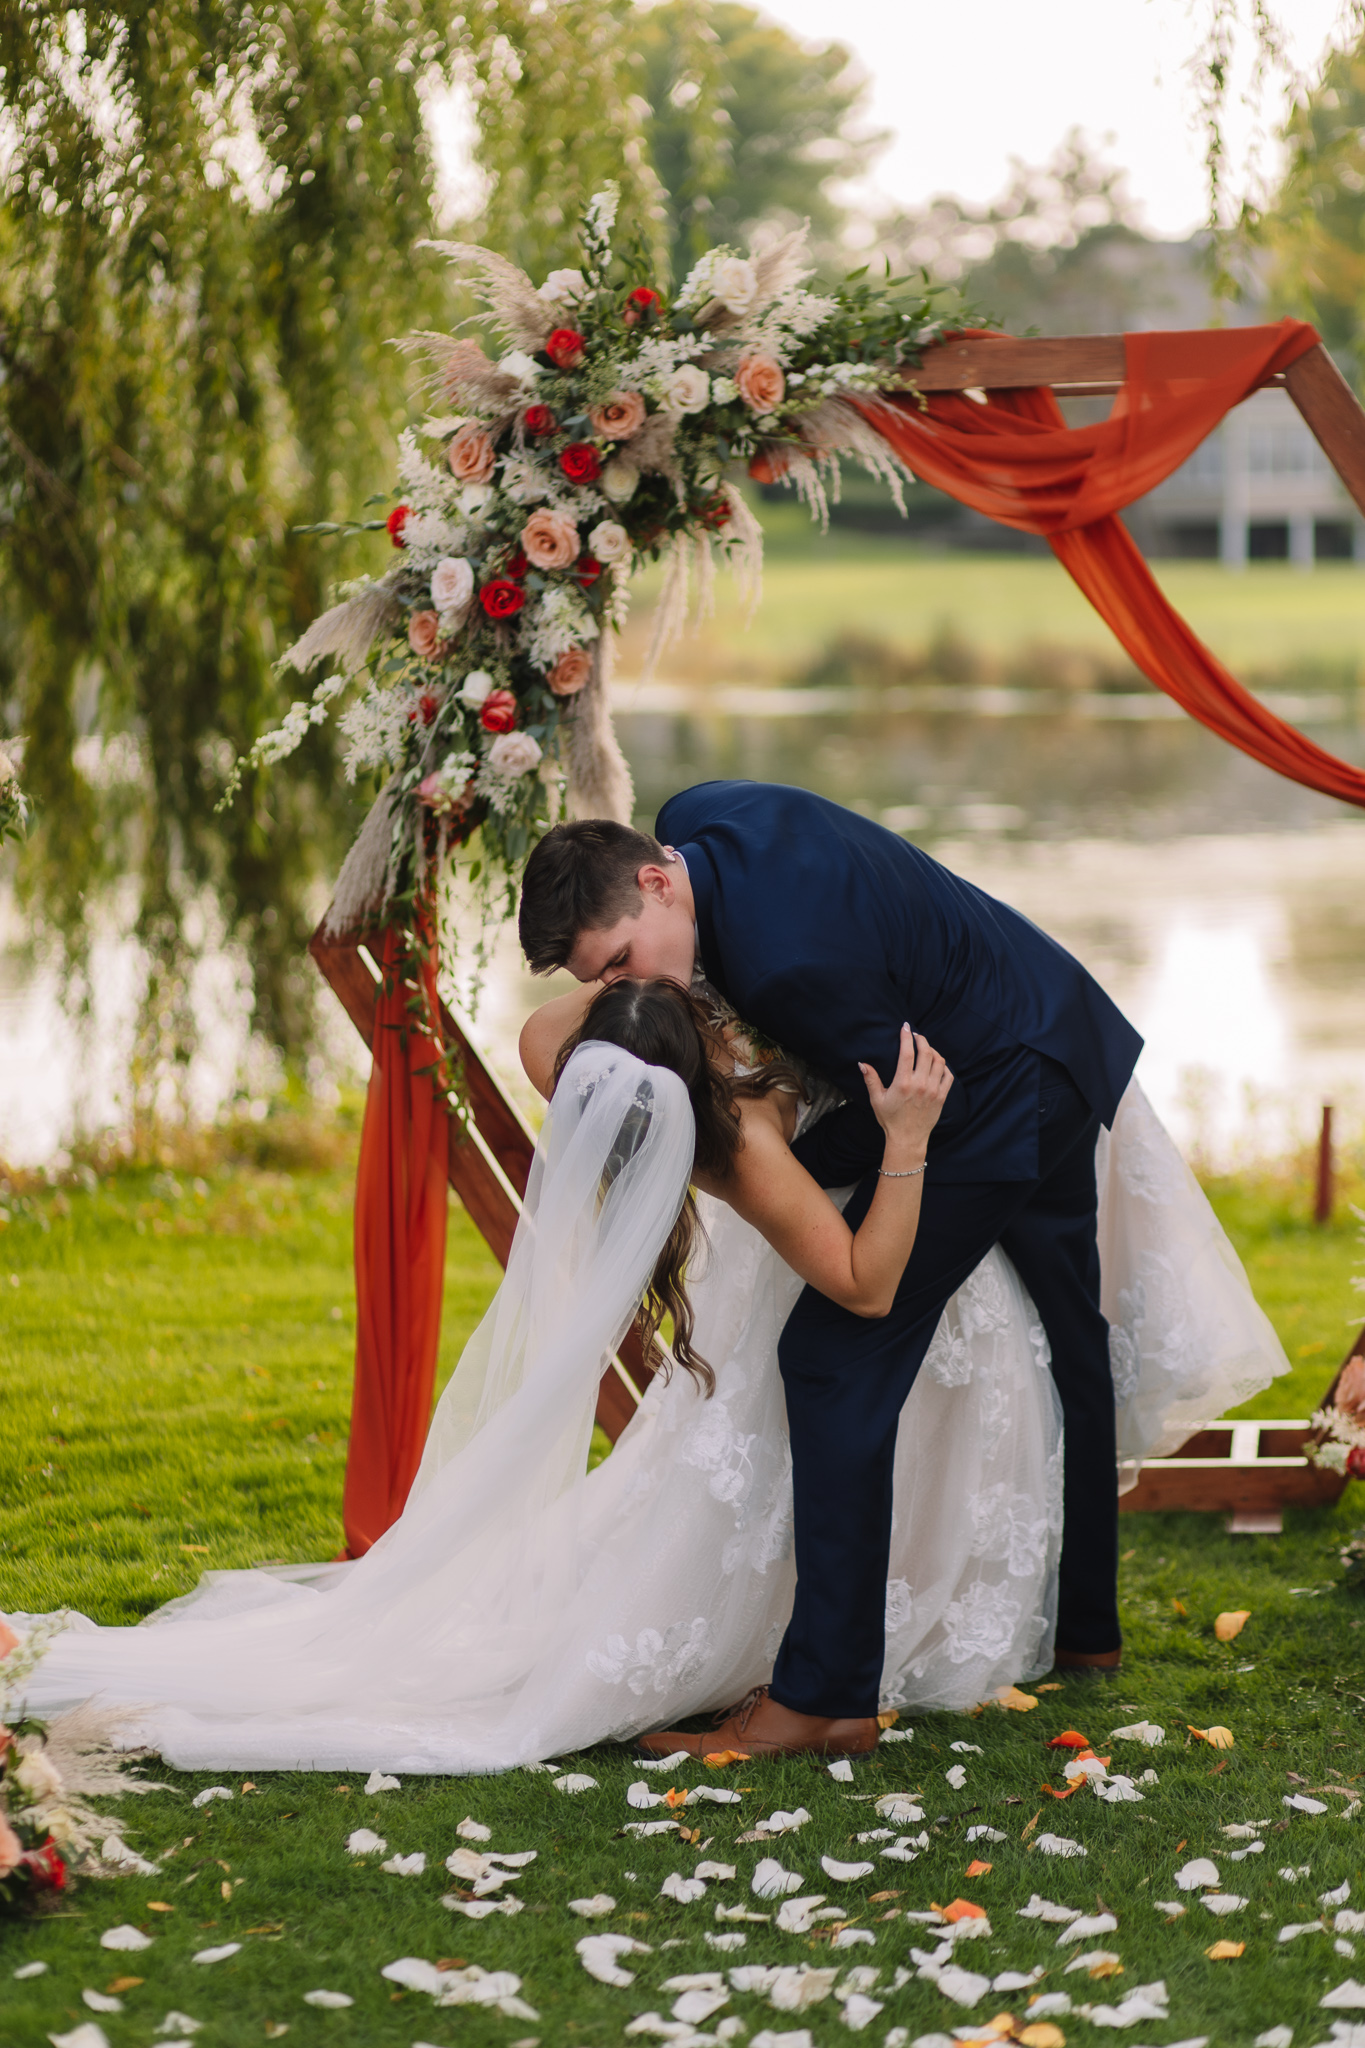 A Groom dipping his Bride and Kissing her in front of the alter, surround by willow trees and a lake.